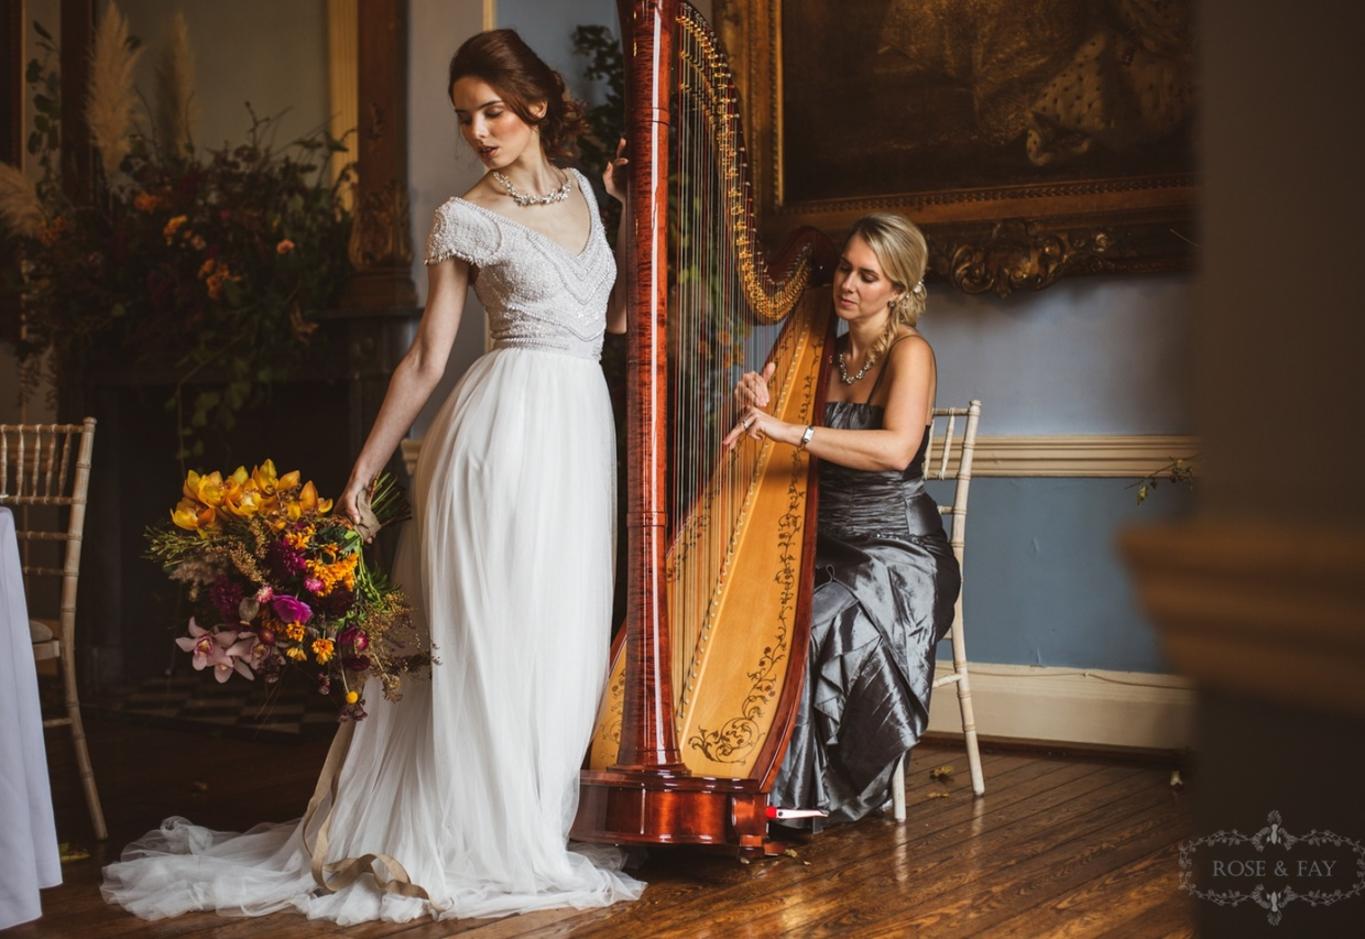 Styled Shot Avante Garde wedding venue Devizes Town Hall Whitewed Willoughby & Wolf Hibiscus & Hodge Pastel Designs classical whimsical autumnal rich harpist grandeur